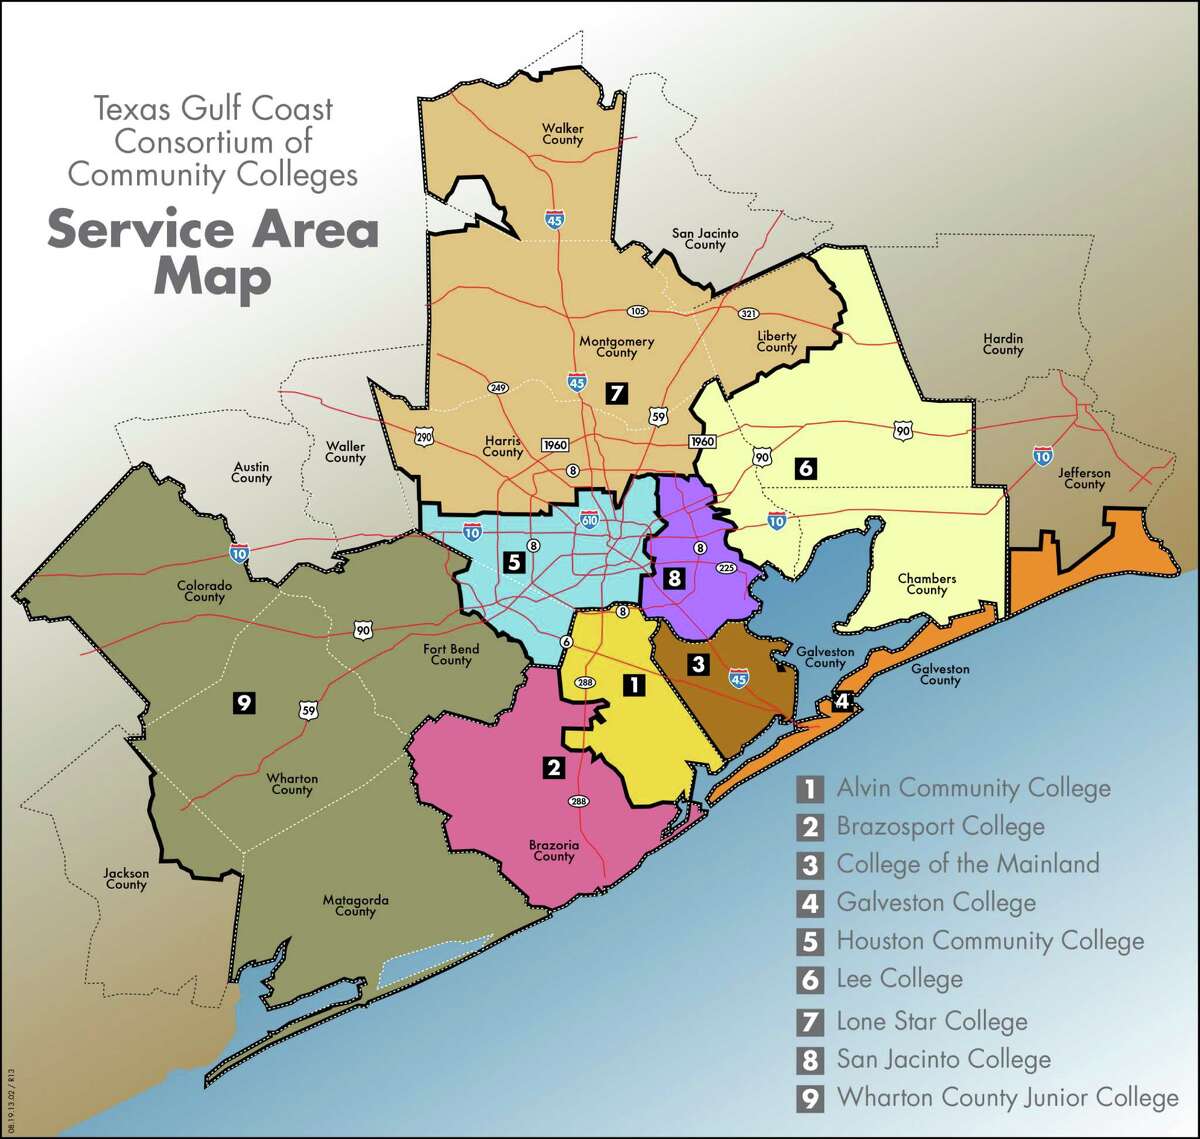 There are nine members of the Texas Gulf Coast Community Colleges Consortium. Shown here are the boundaries of the colleges in the greater Houston region.